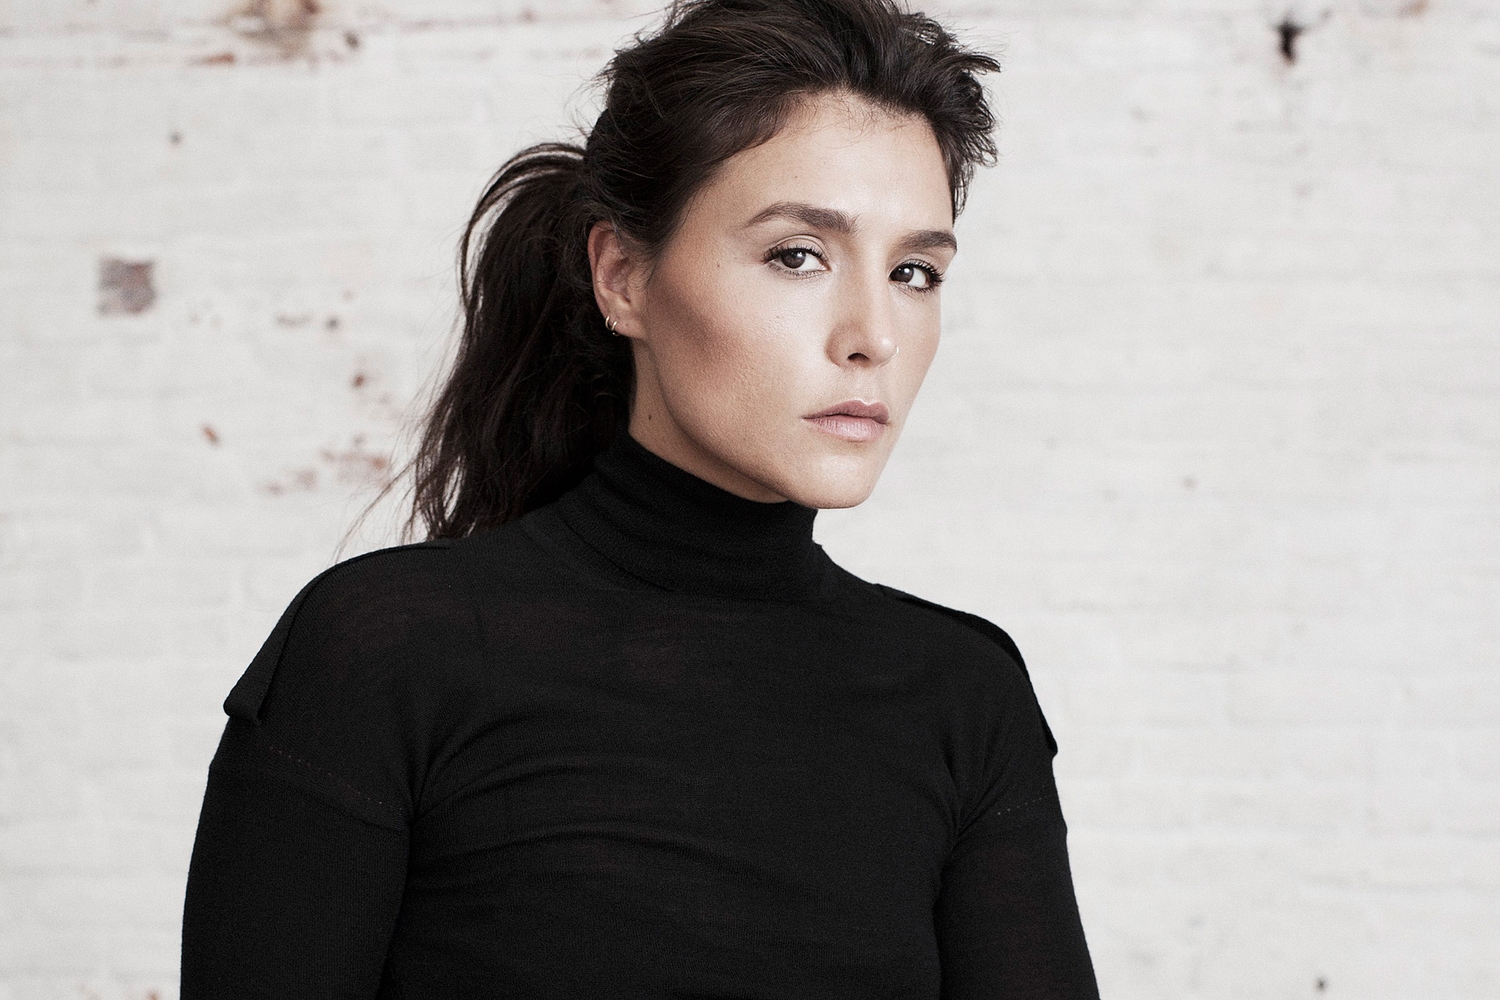 Jessie Ware: "I’m laughing, I’m being self-deprecating, I’m taking the piss out of myself"